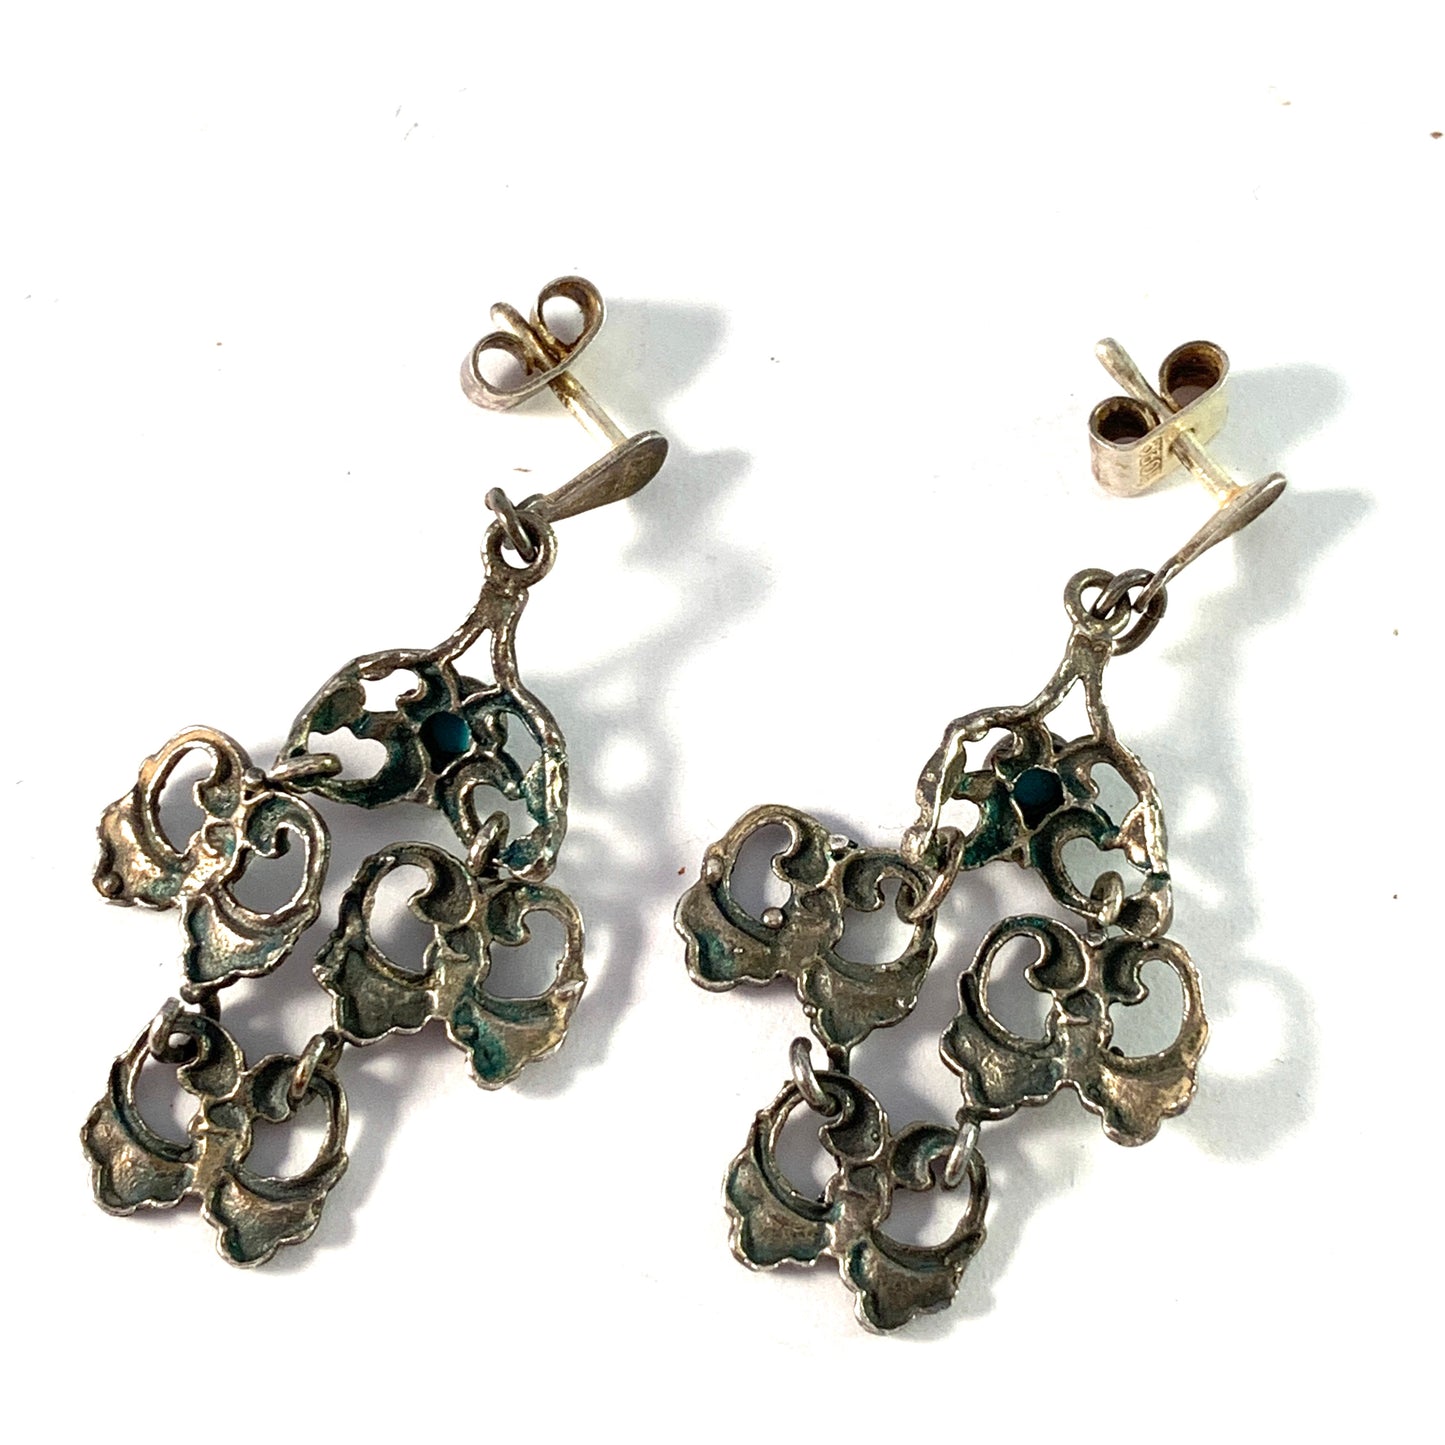 Finland, Vintage c 1950s Solid 830 Silver Turquoise Earrings.